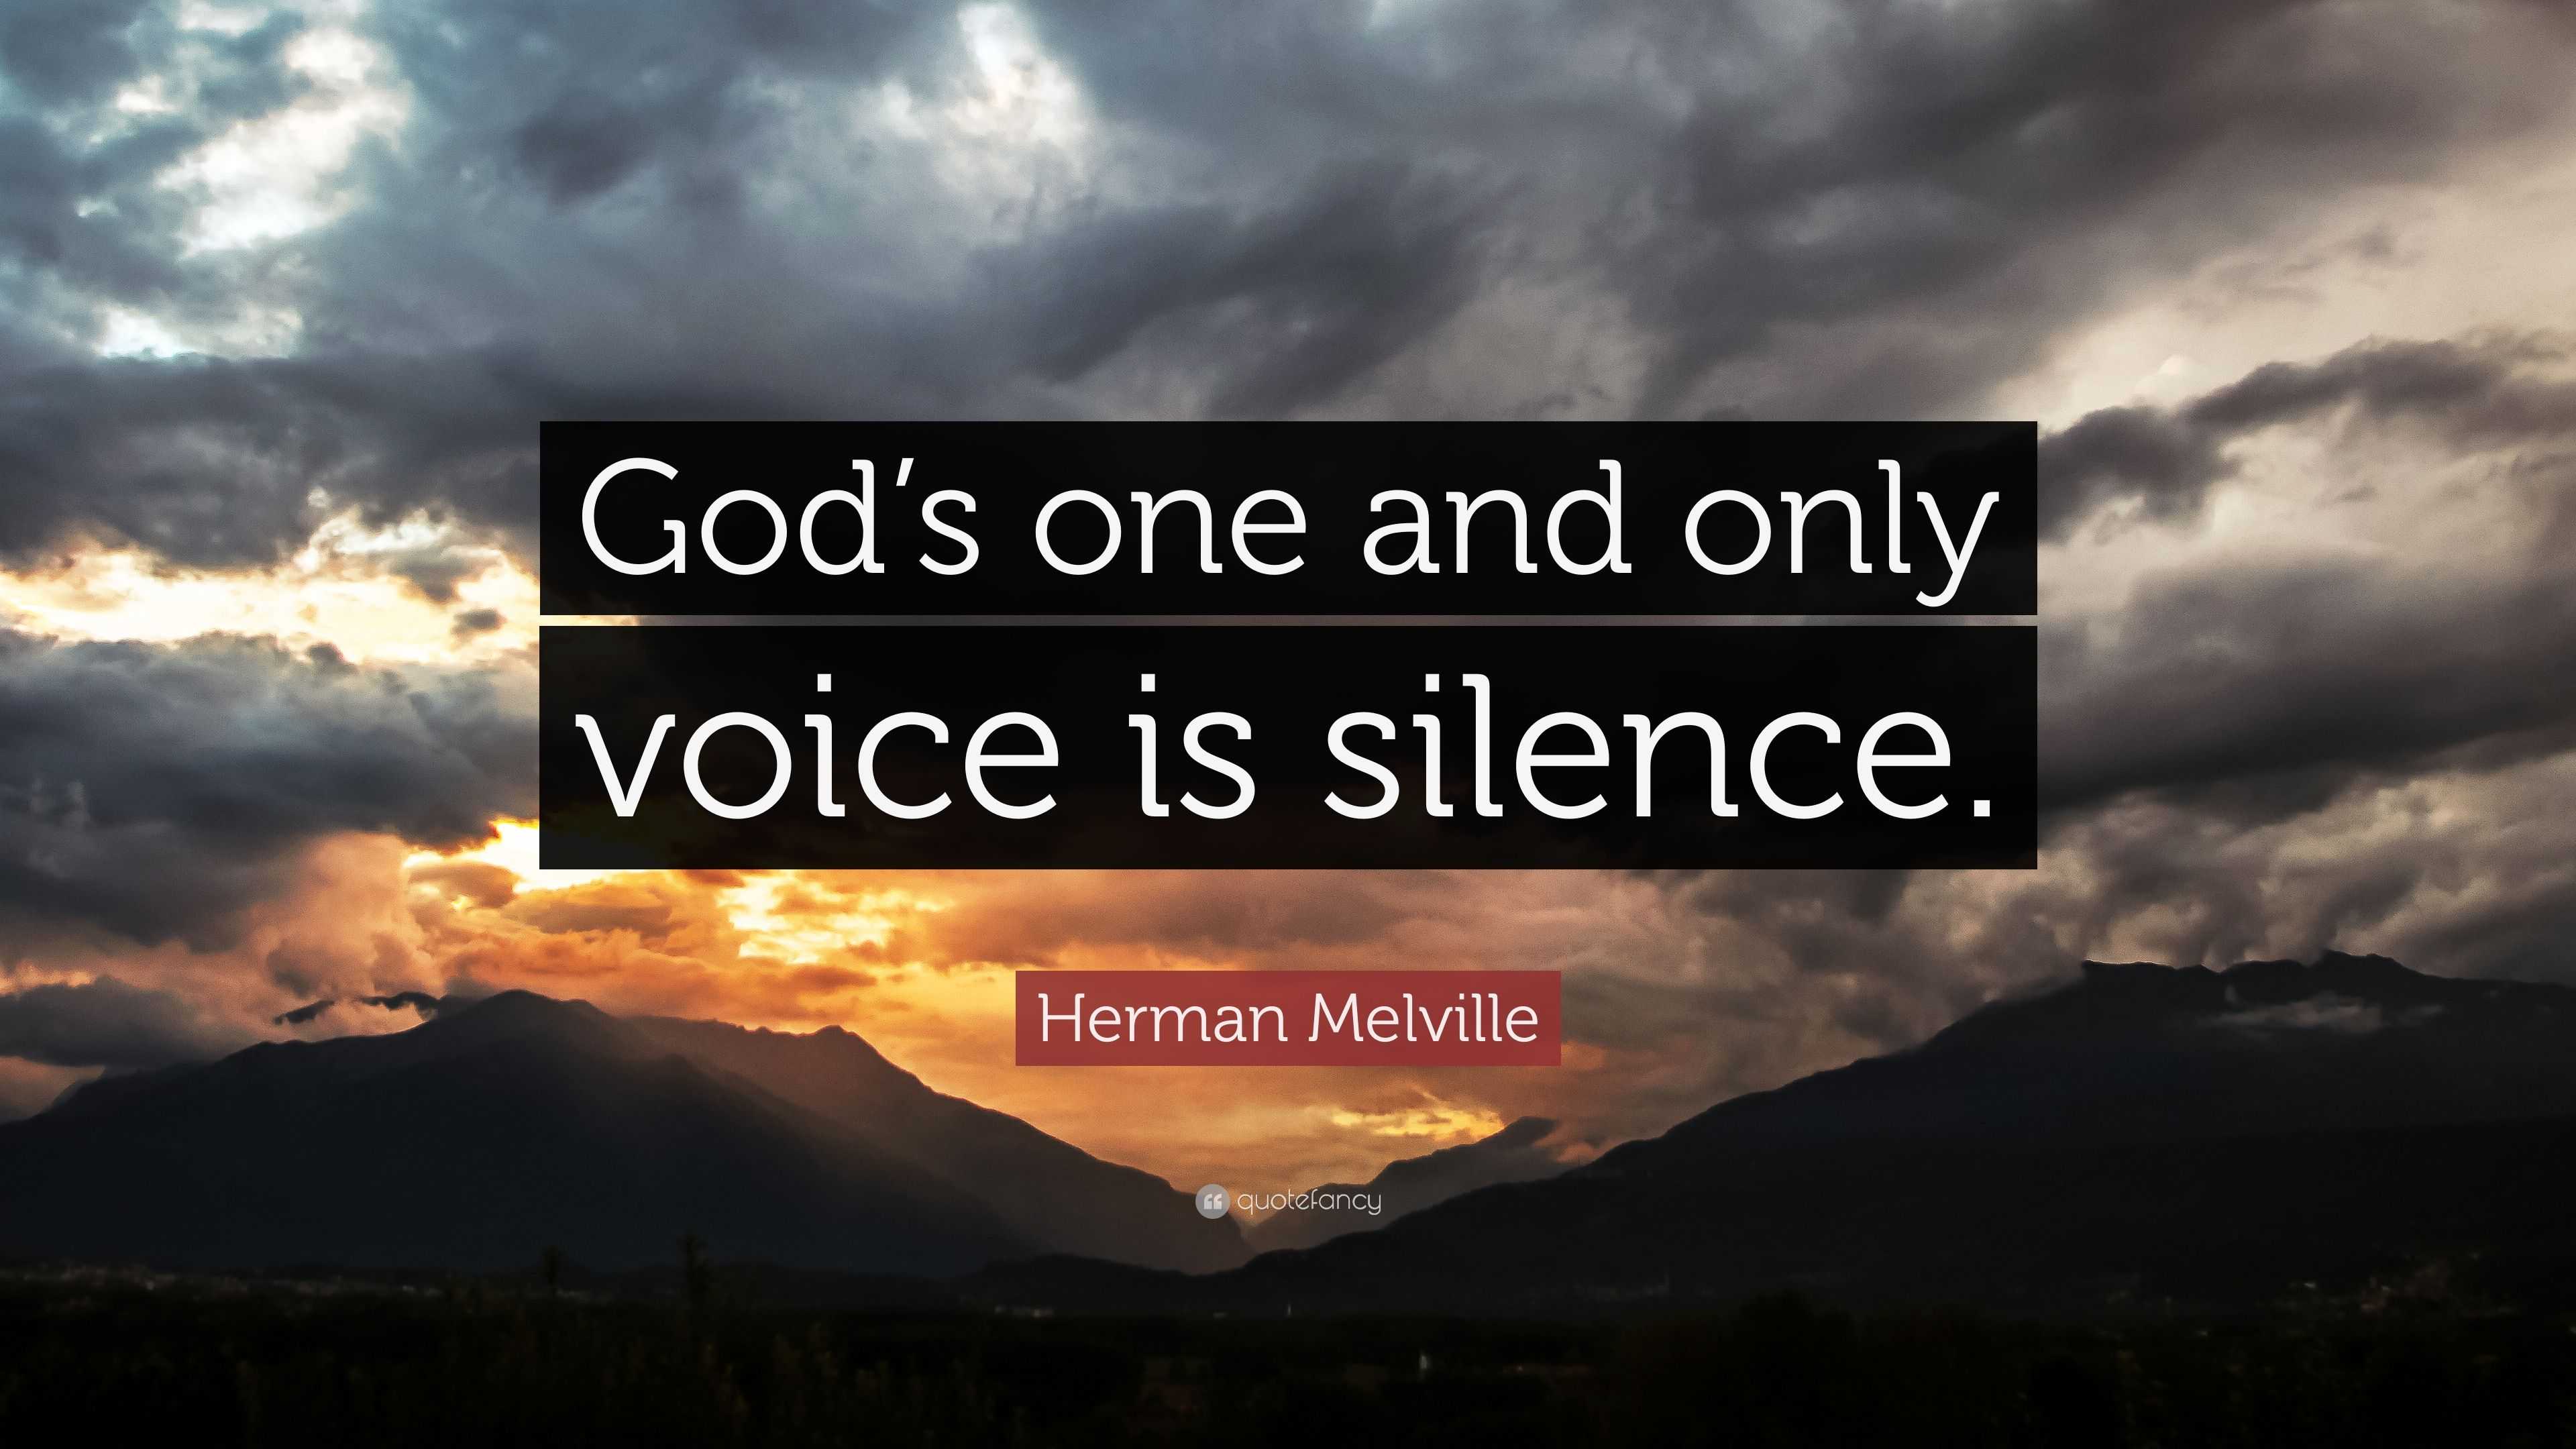 Herman Melville Floating Quote Gods One and Only Voice is Silence